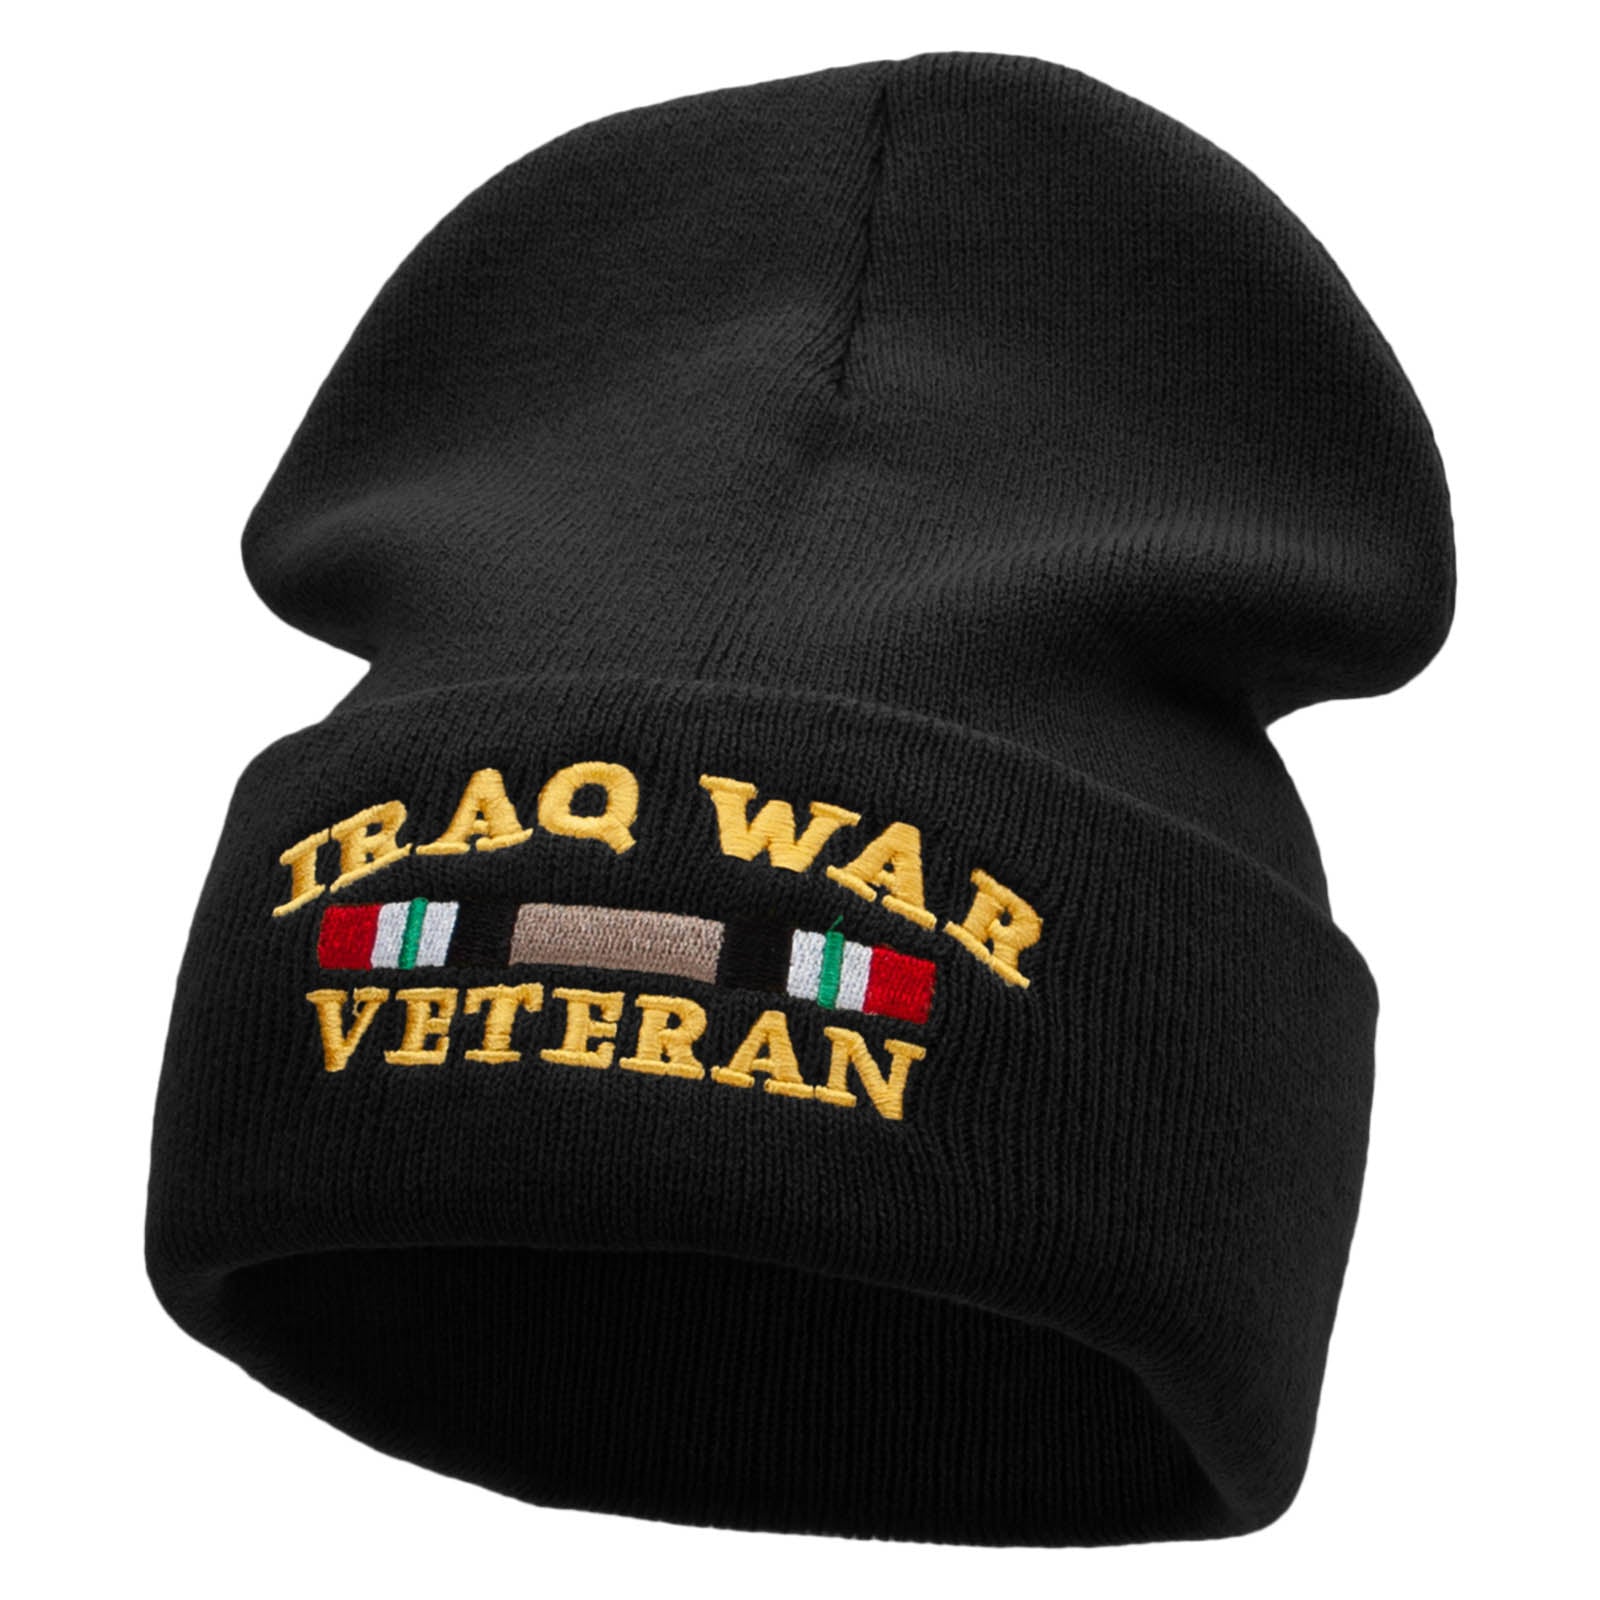 Iraq War Ribbon Embroidered 12 Inch Solid Knit Cuff Long Beanie Made in USA - Black OSFM